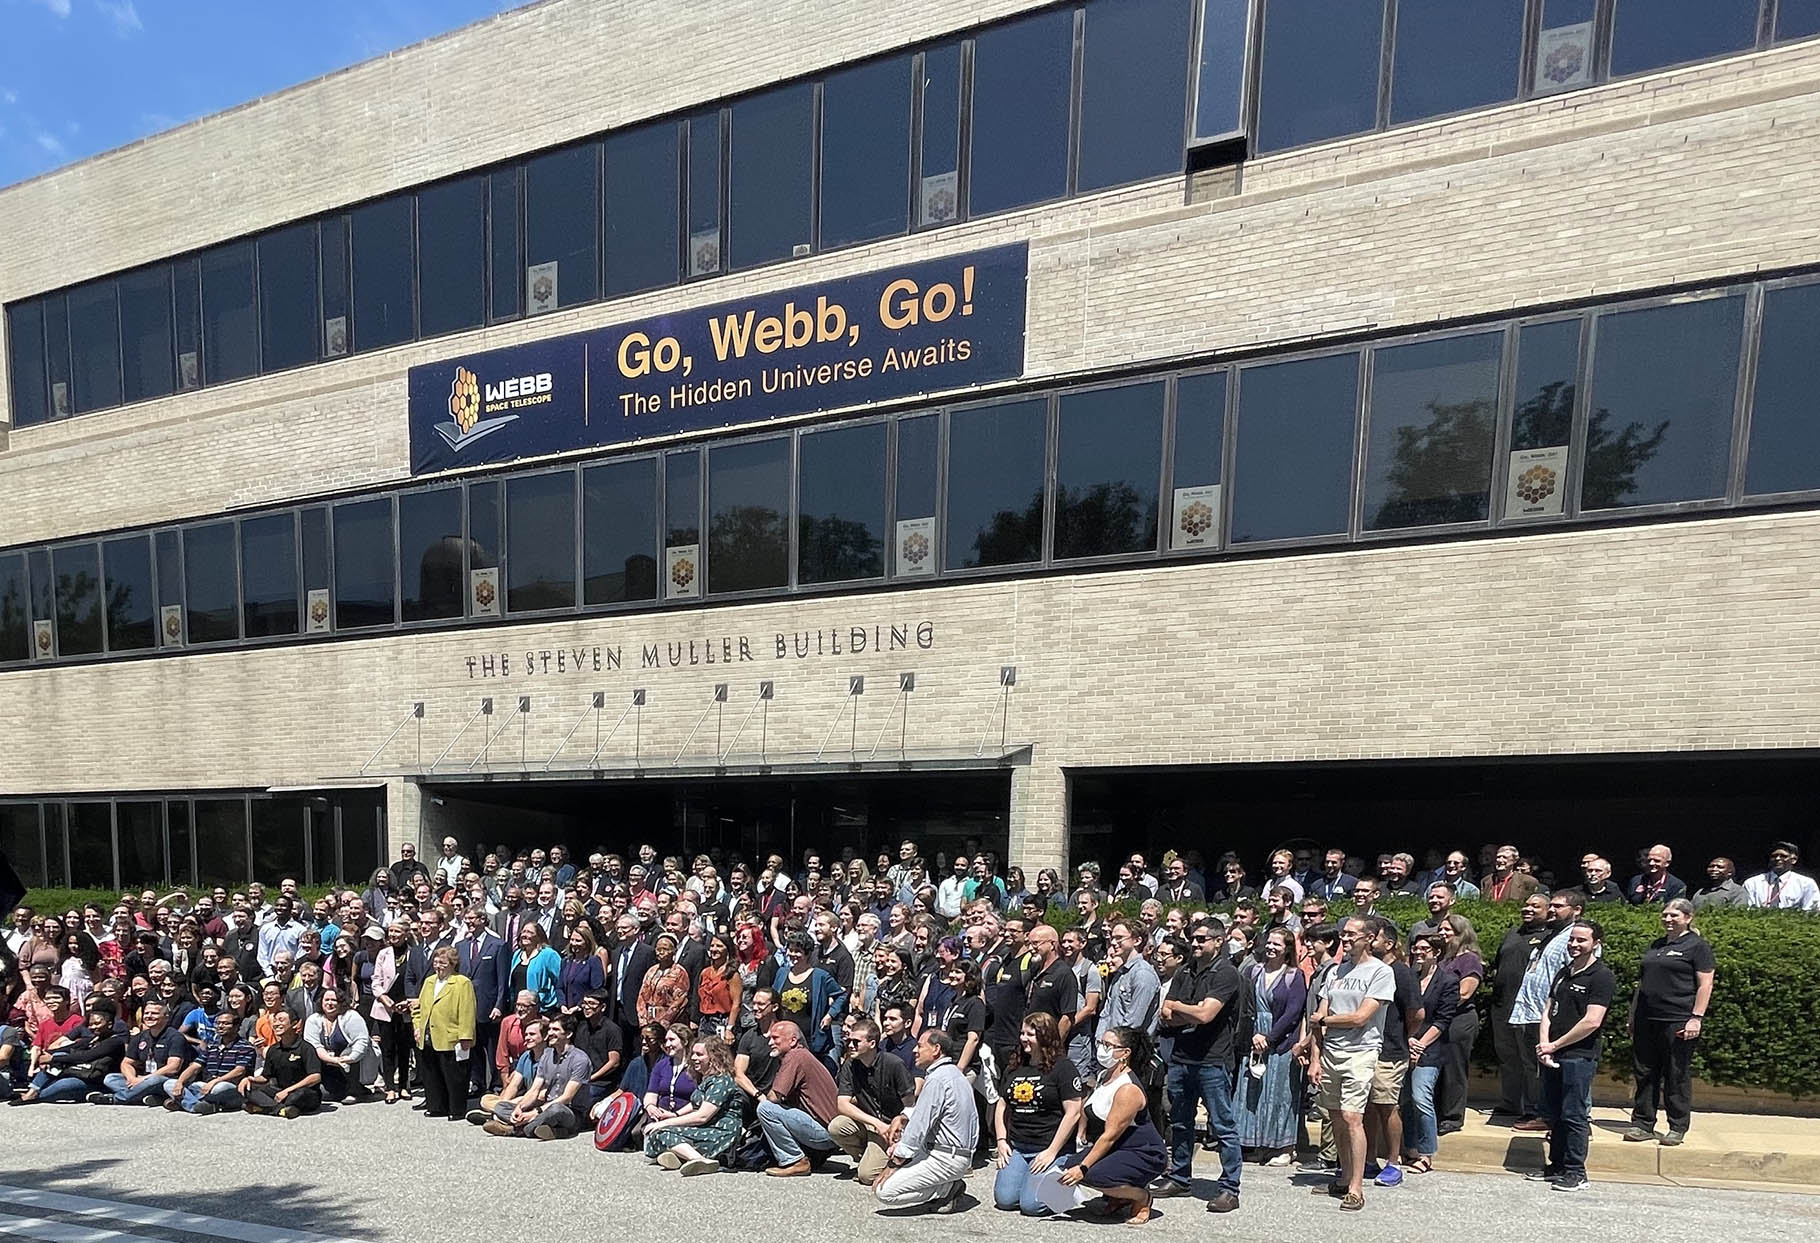 A crowd of people outside of the STSc. building cheer the first science results of JWST. A banner with the text "Go, Webb, Go!" hangs on the building above them.